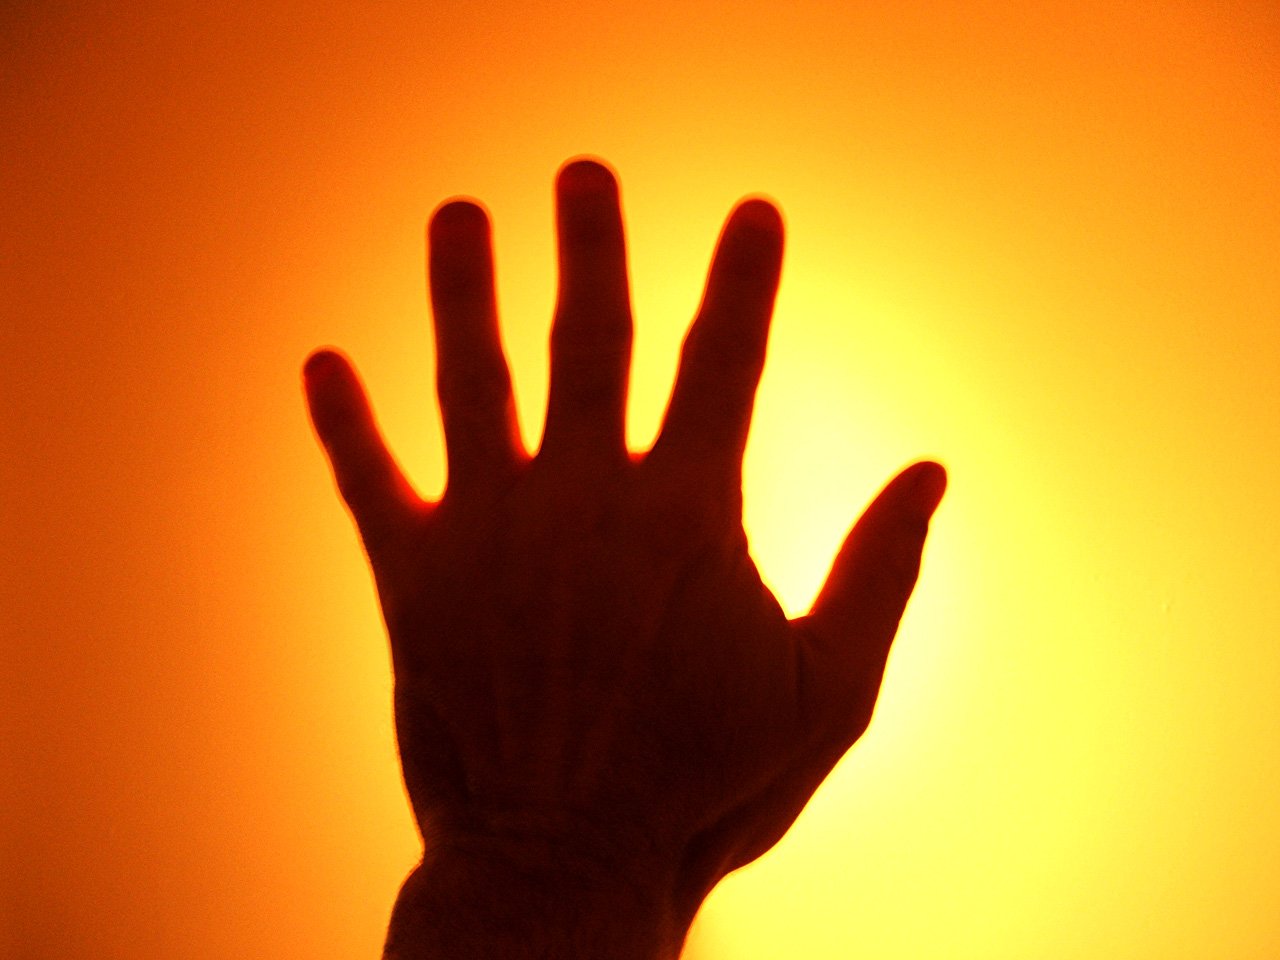 a hand reaches up to touch the sun